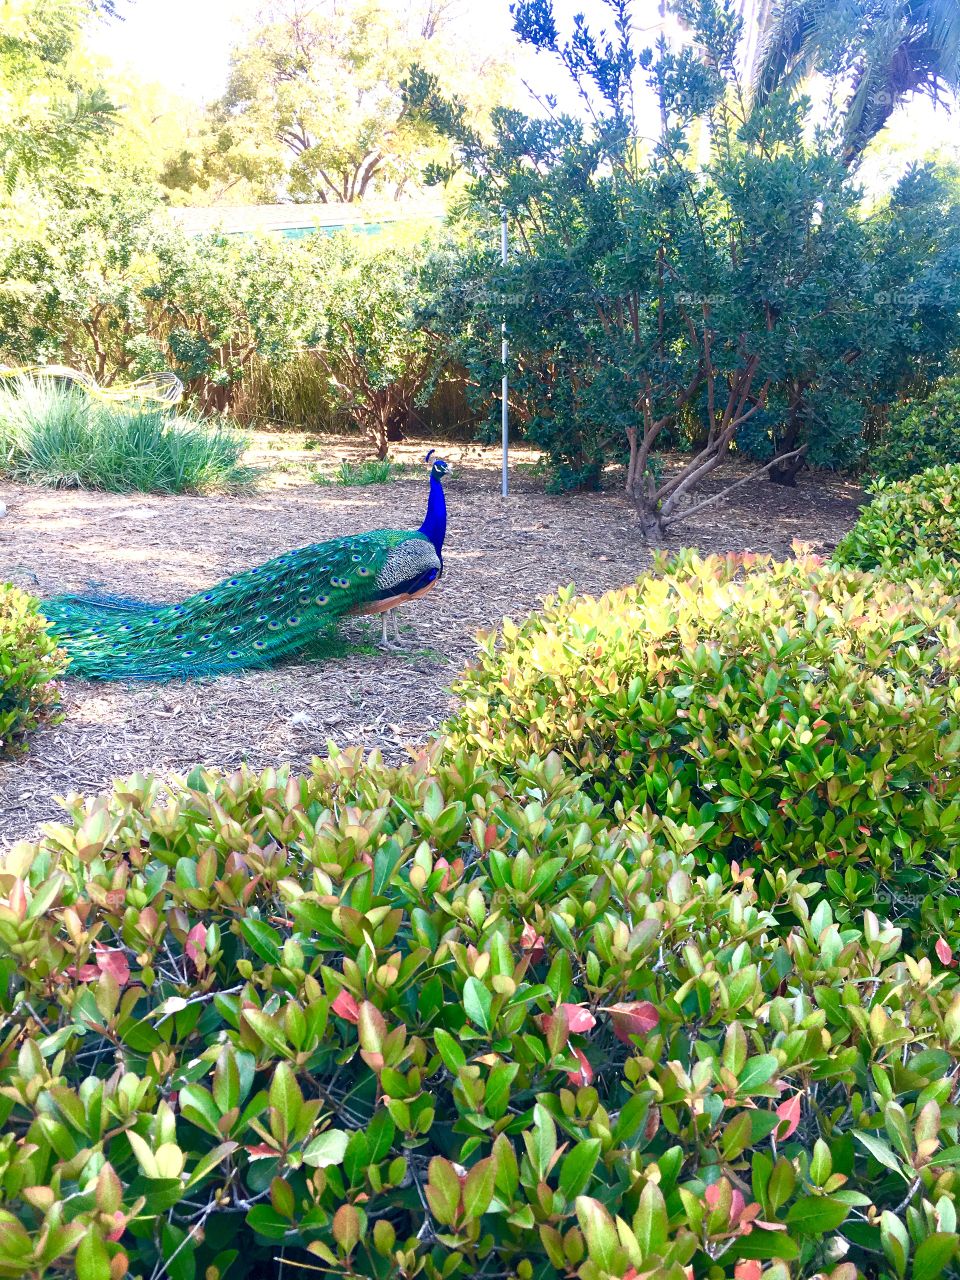 Beautiful Los Angeles Botanical Gardens and Arboretum. I’ve posted several pictures of the beautiful peacocks that are roaming the grounds everywhere! Even their butts are beautiful!🦚😄